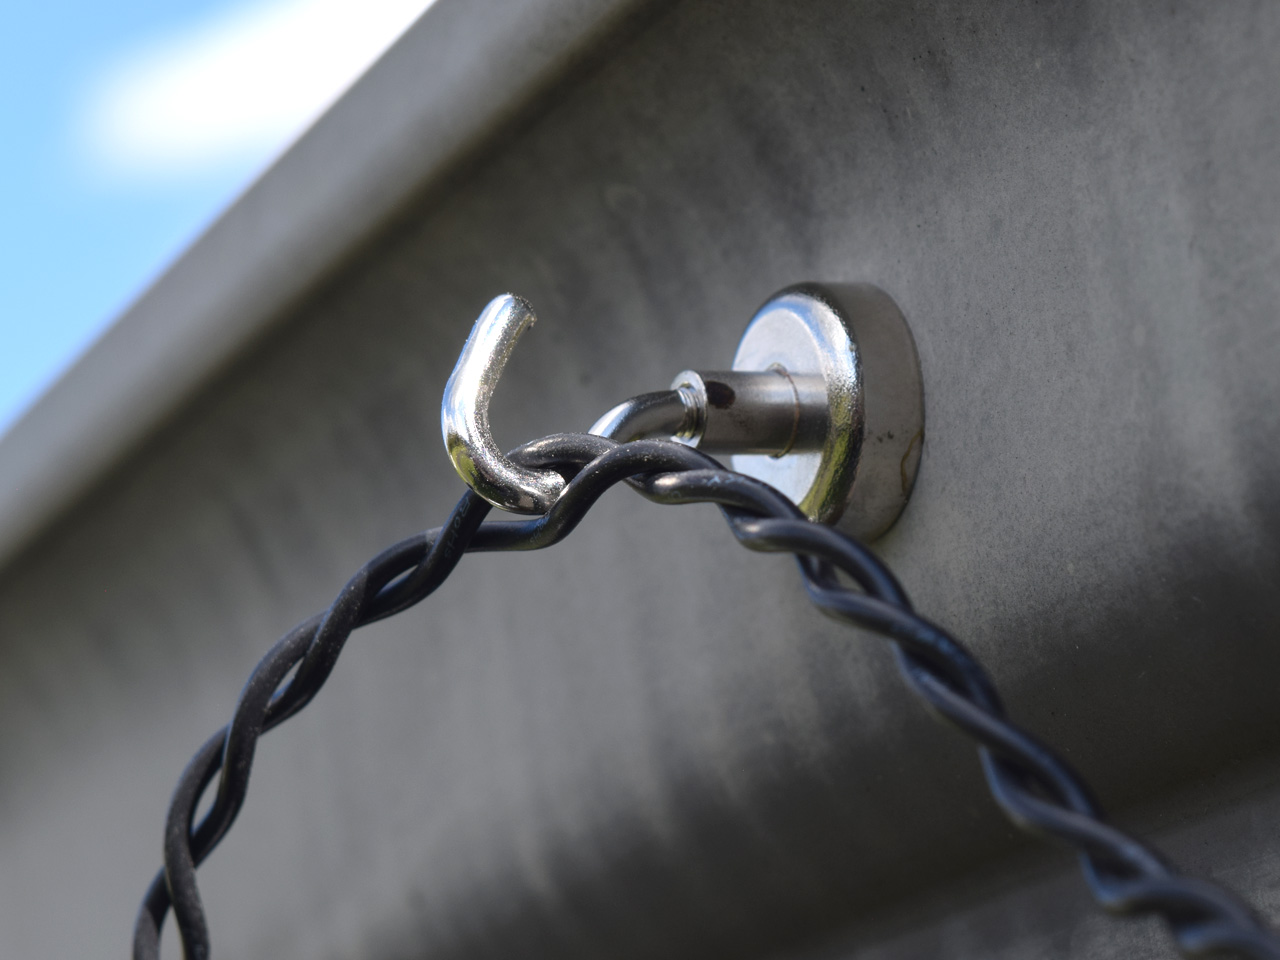 Mounting magnet hanging chain from metal gutter